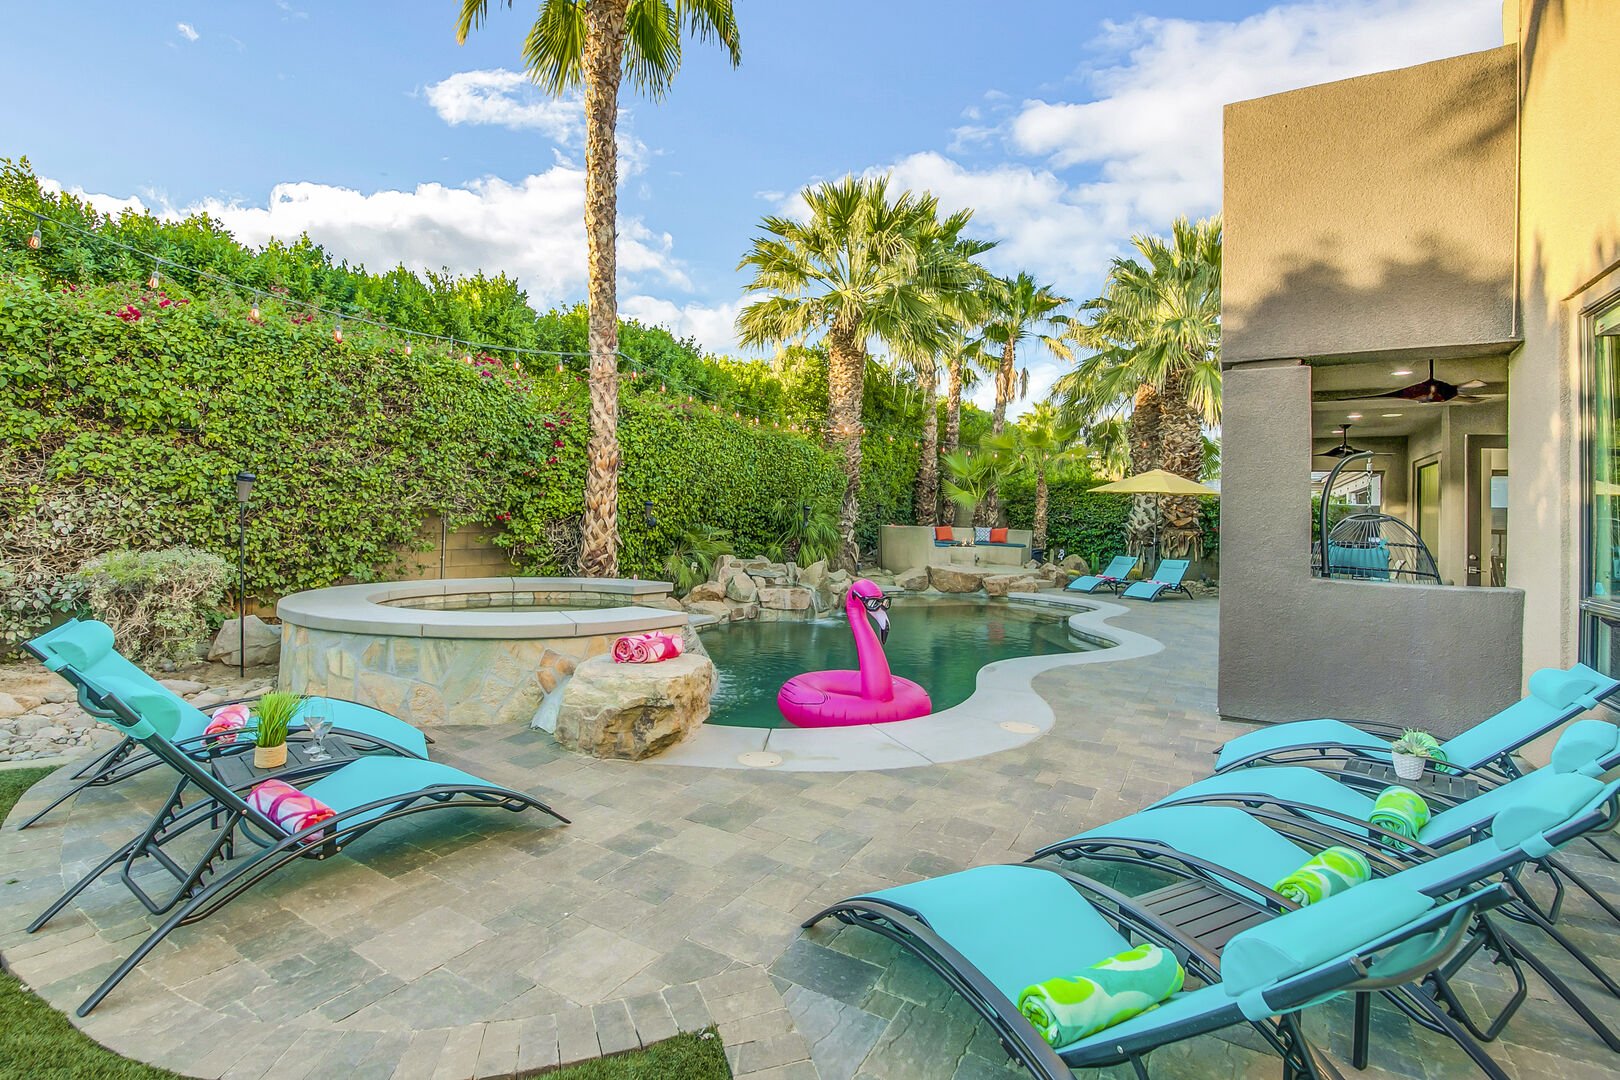 Lay on one of eight lounge chairs or take a dip in the extra-large refreshing pool. 